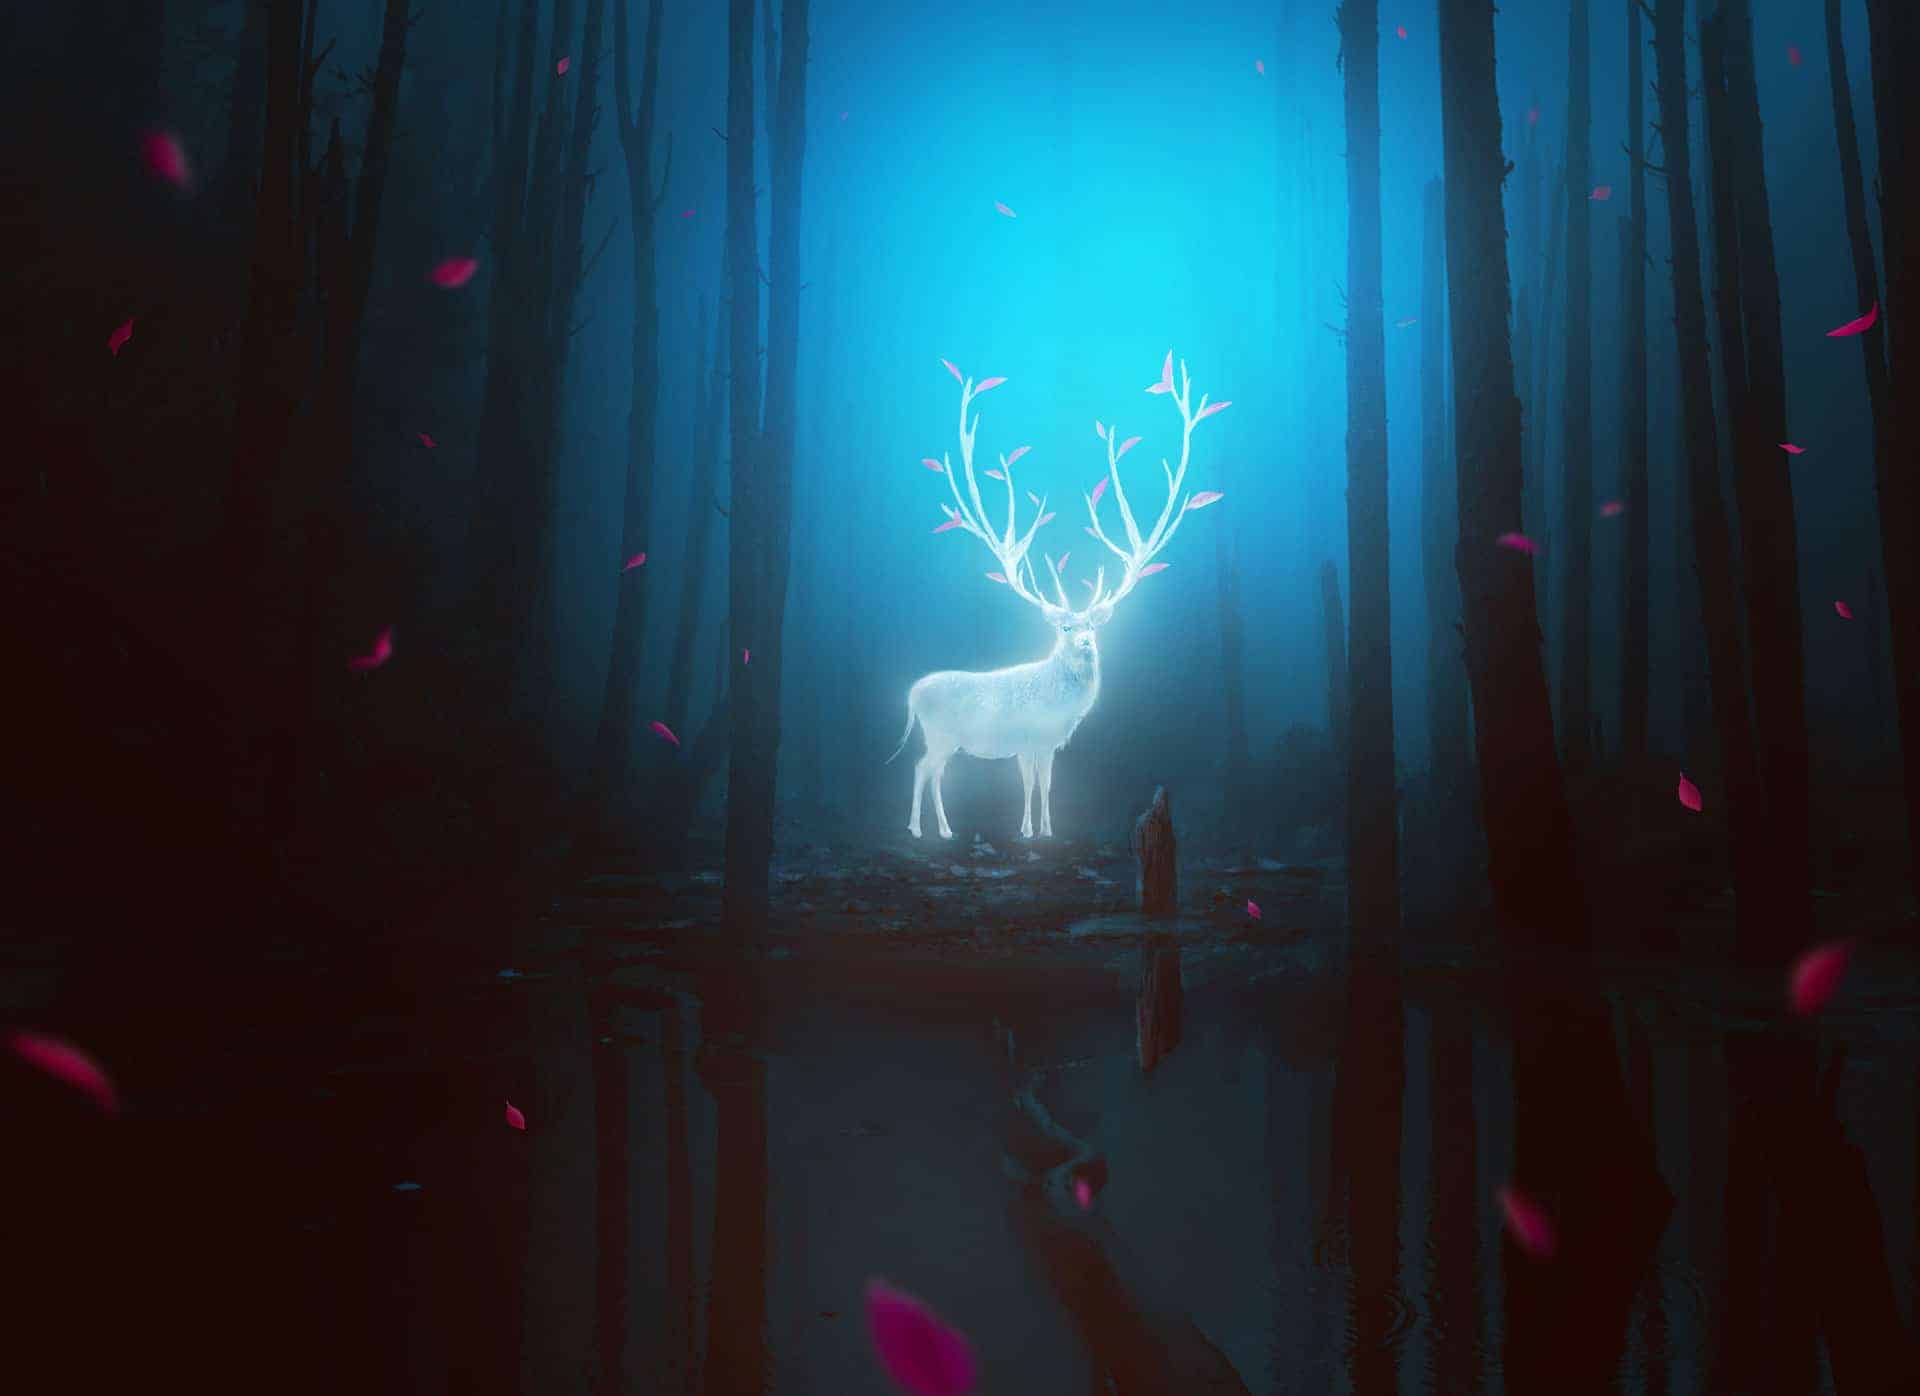 How to Create a Fantasy Deer Photo Manipulation With Adobe Photoshop